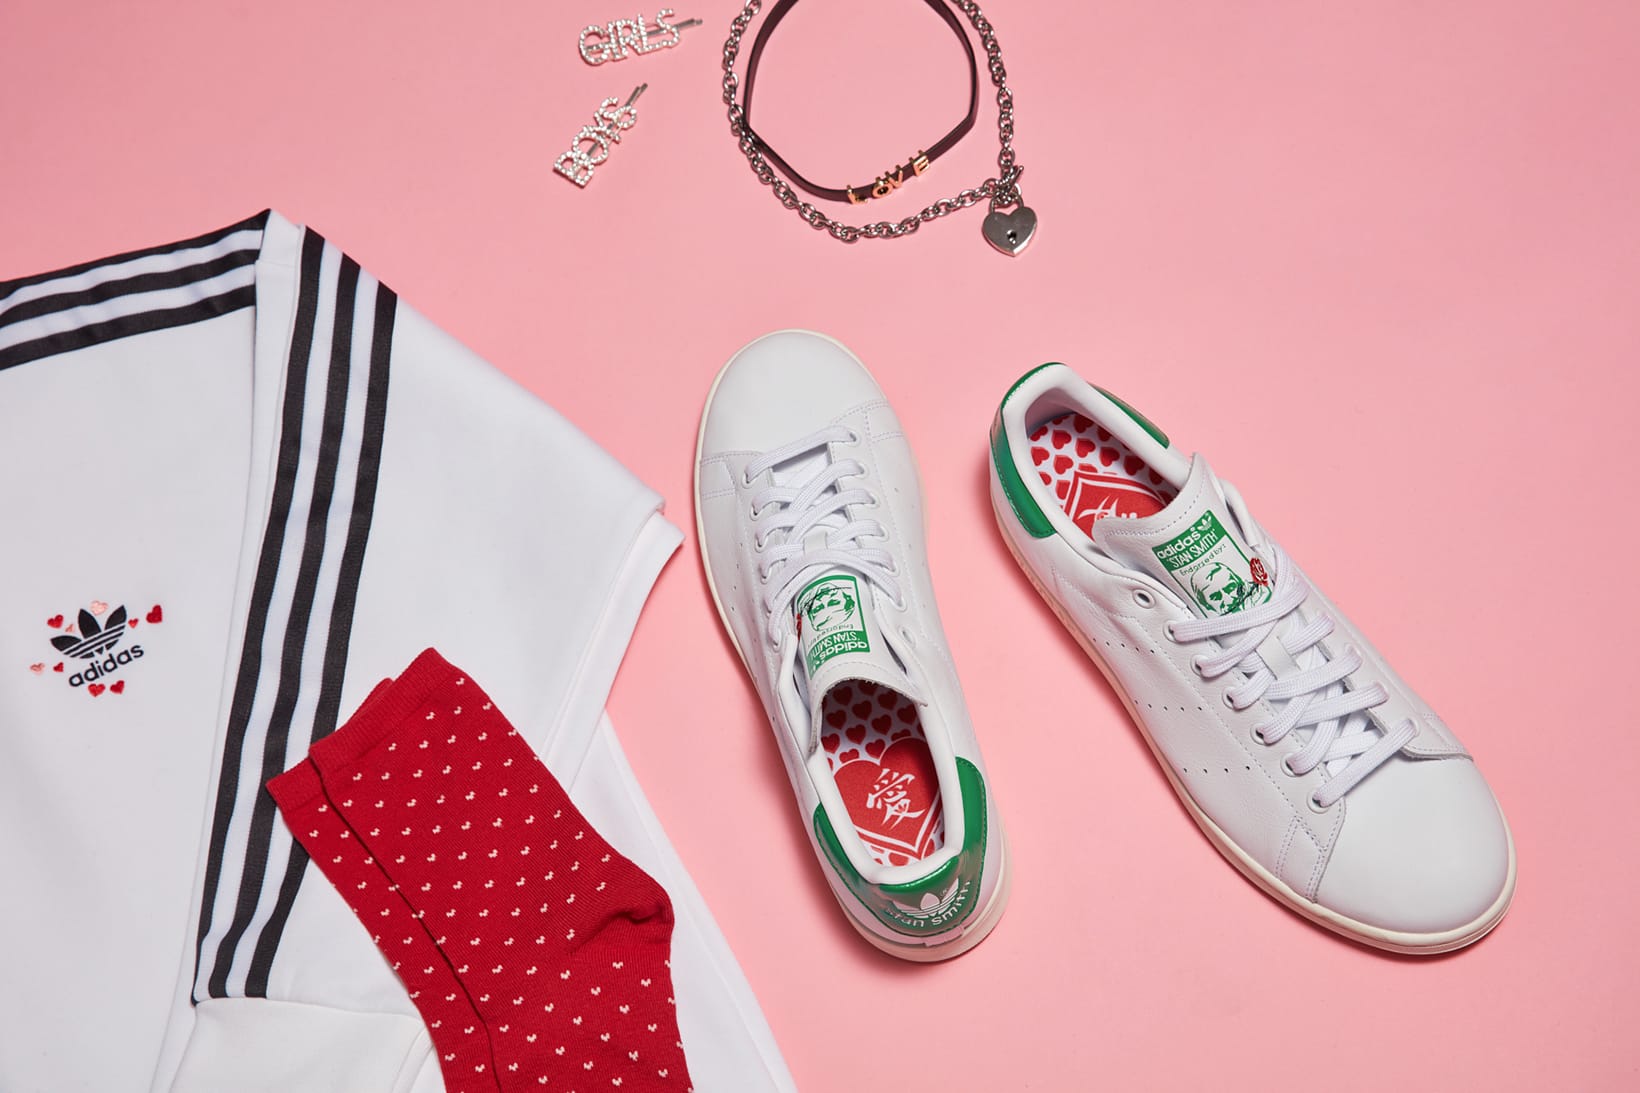 adidas love collection